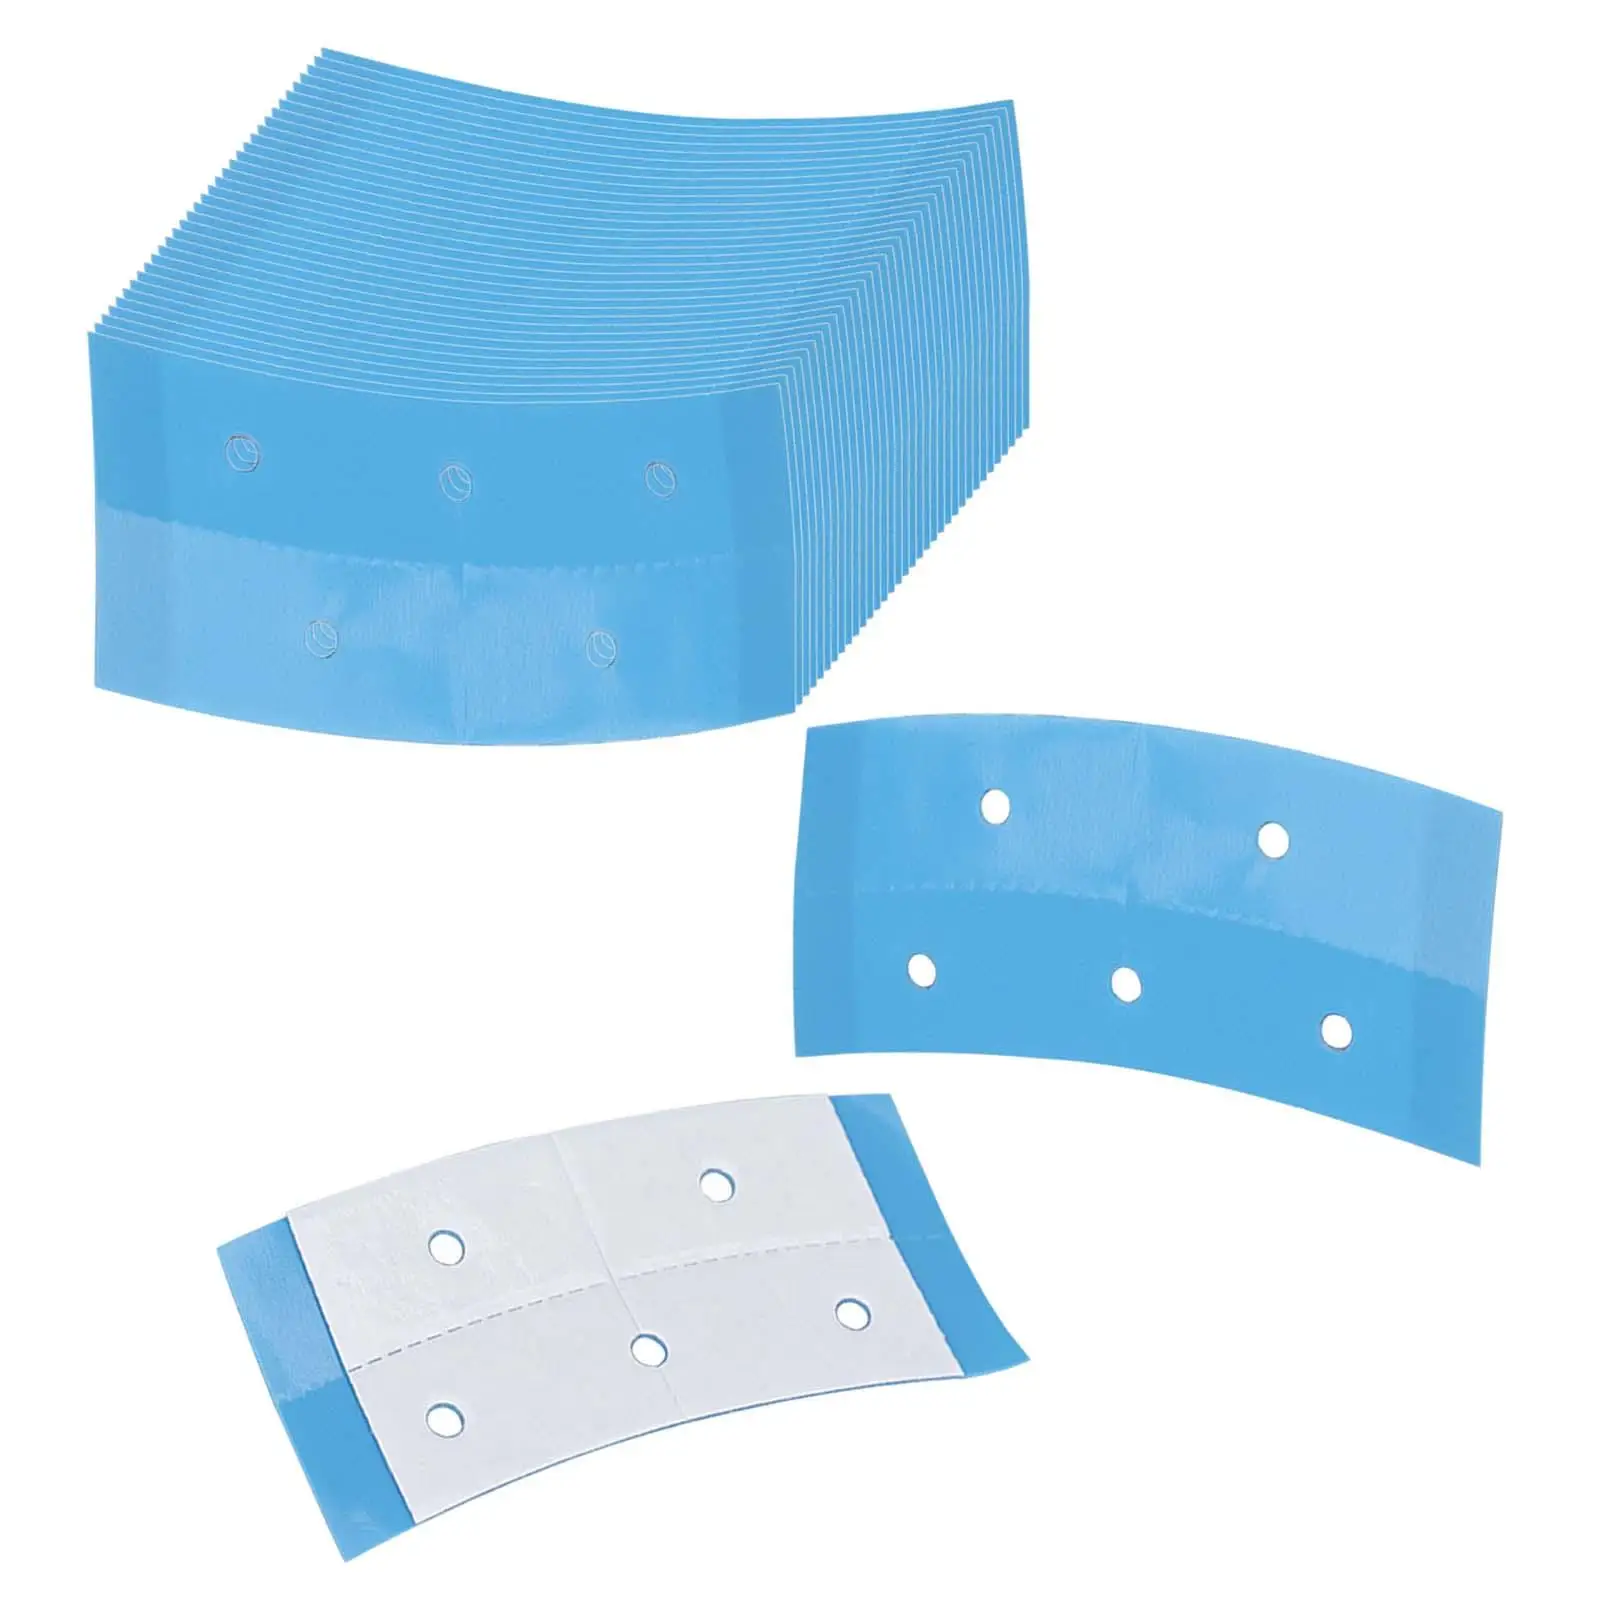 36 Pieces Hair Wig Tape Adhesive Tape Blue Hair Extensions Tape Wig Tape Strips for Lace Front Toupee Hair Extension Hair Pieces